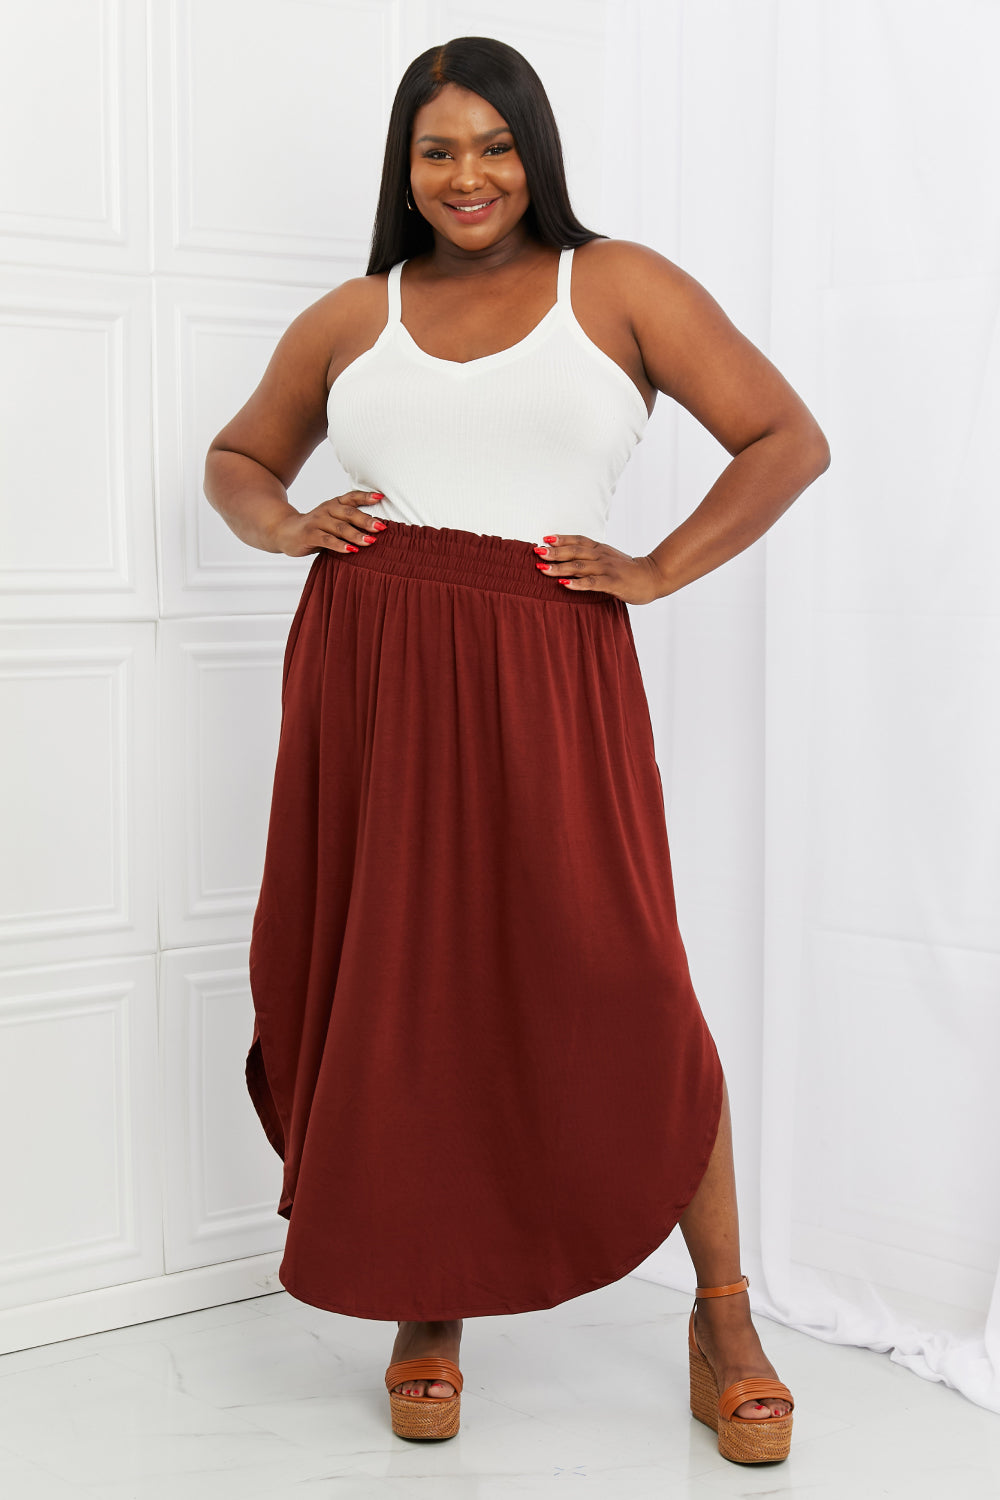 Zenana It's My Time Full Size Side Scoop Scrunch Skirt in Dark Rust - Cheeky Chic Boutique